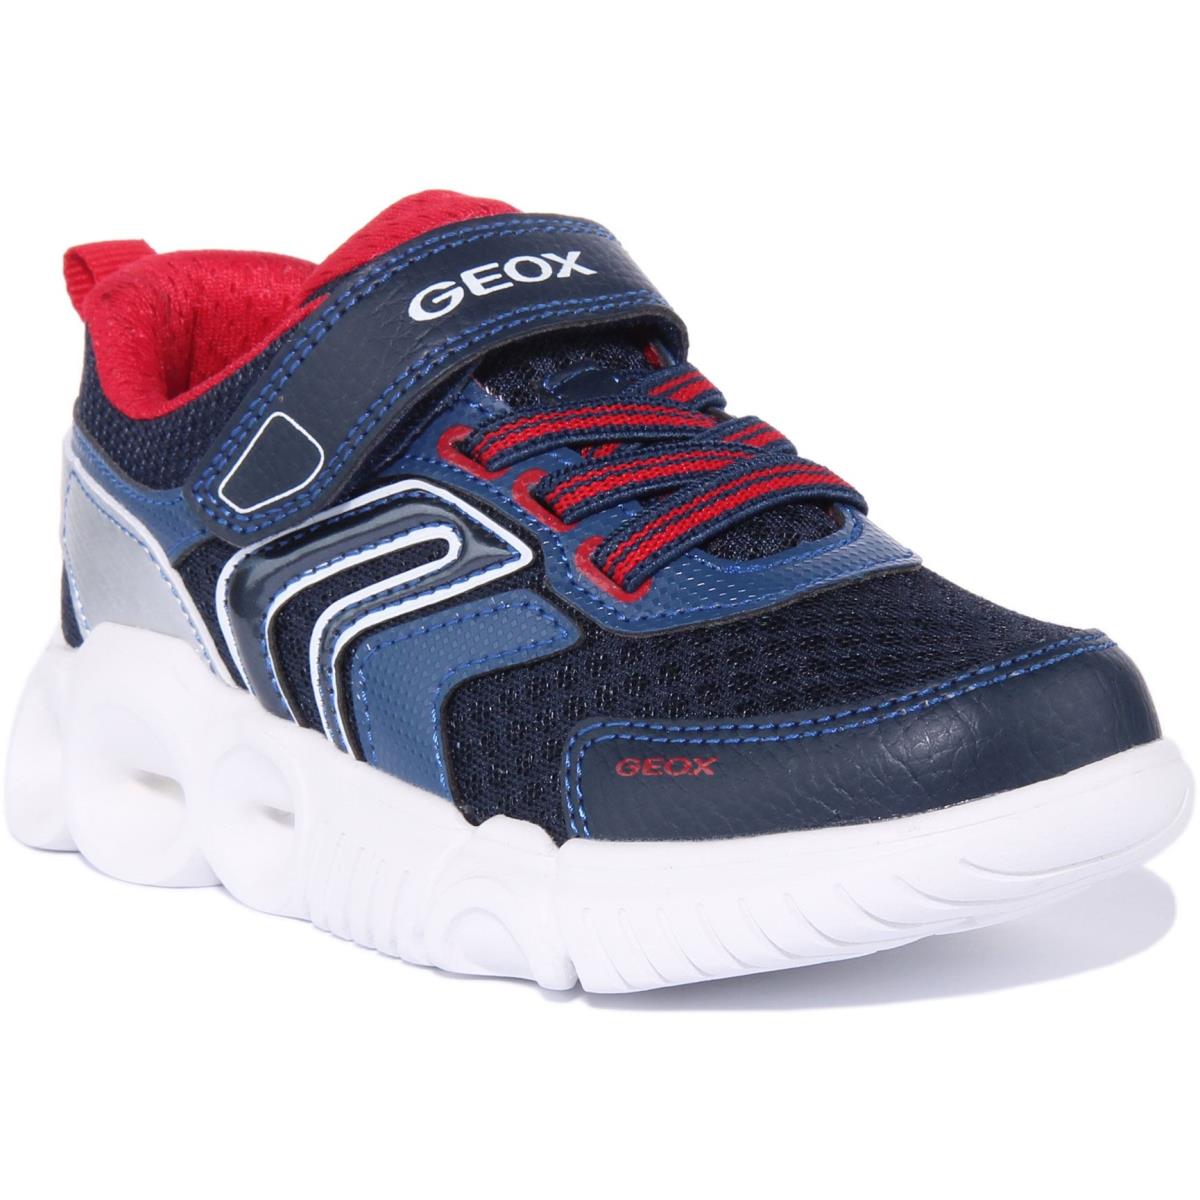 Geox J Wroom Boys Single Strap Led Sneakers In Navy Red Size US 9 - 4 NAVY RED